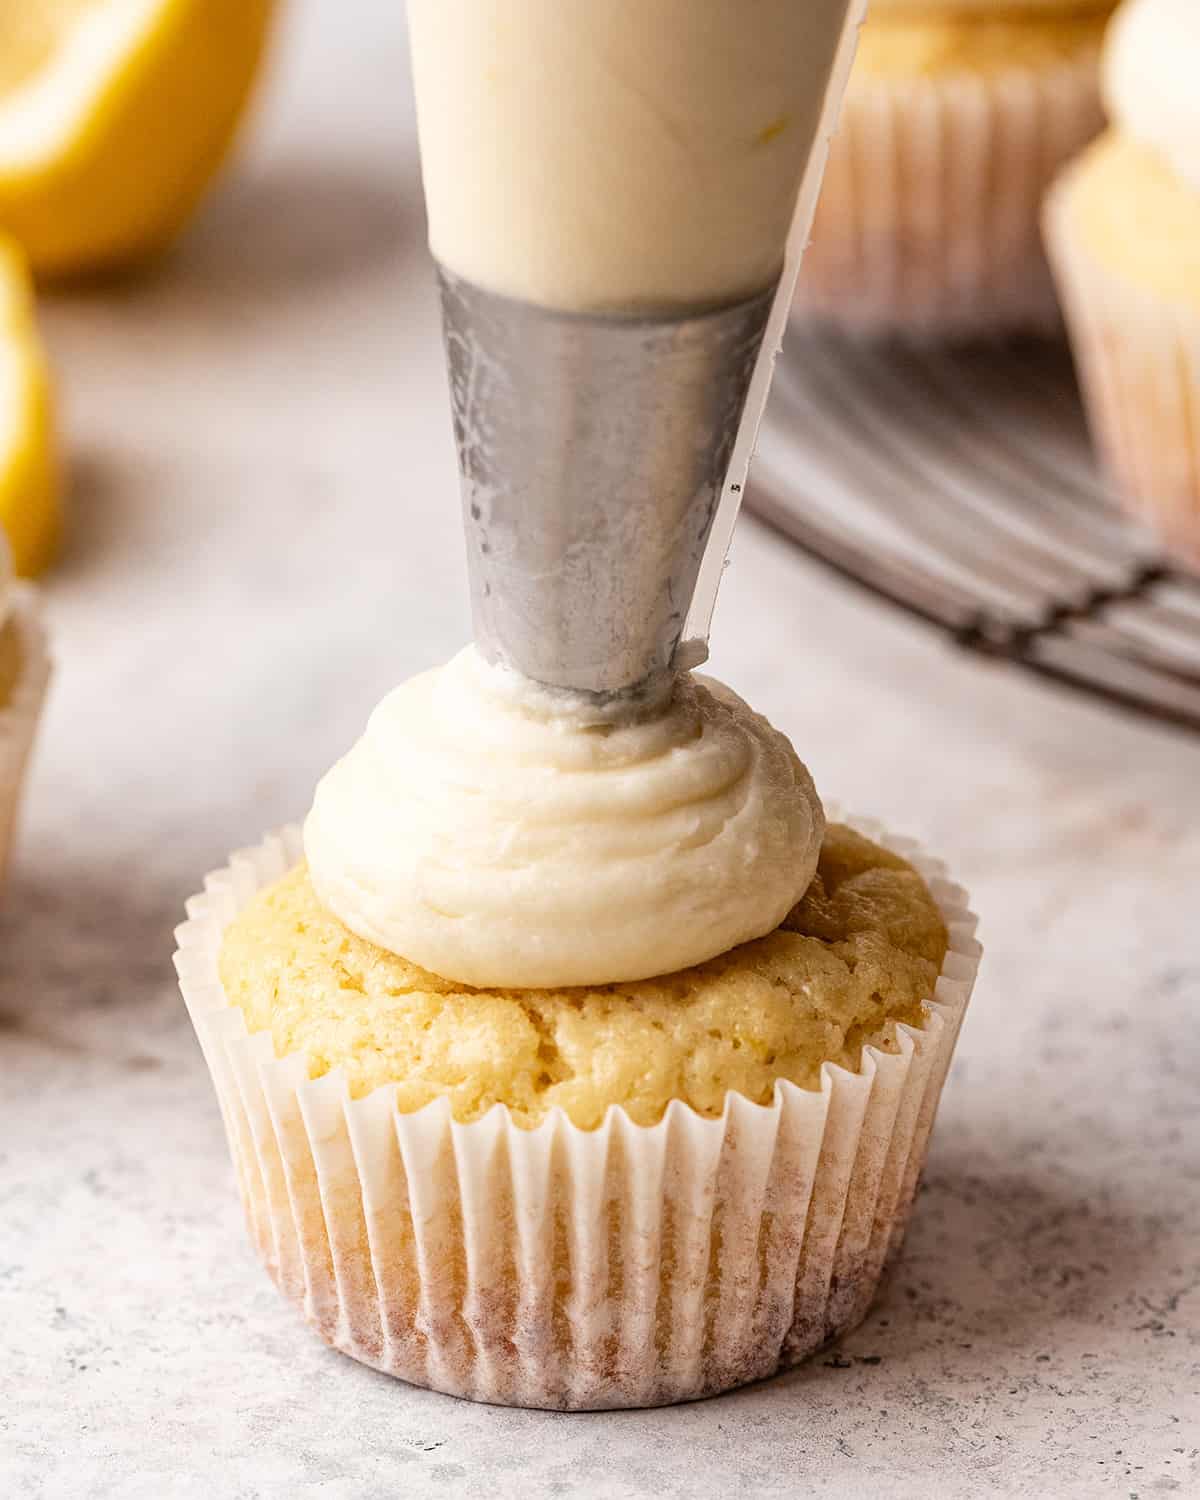 lemon buttercream frosting being piped onto a cupcake